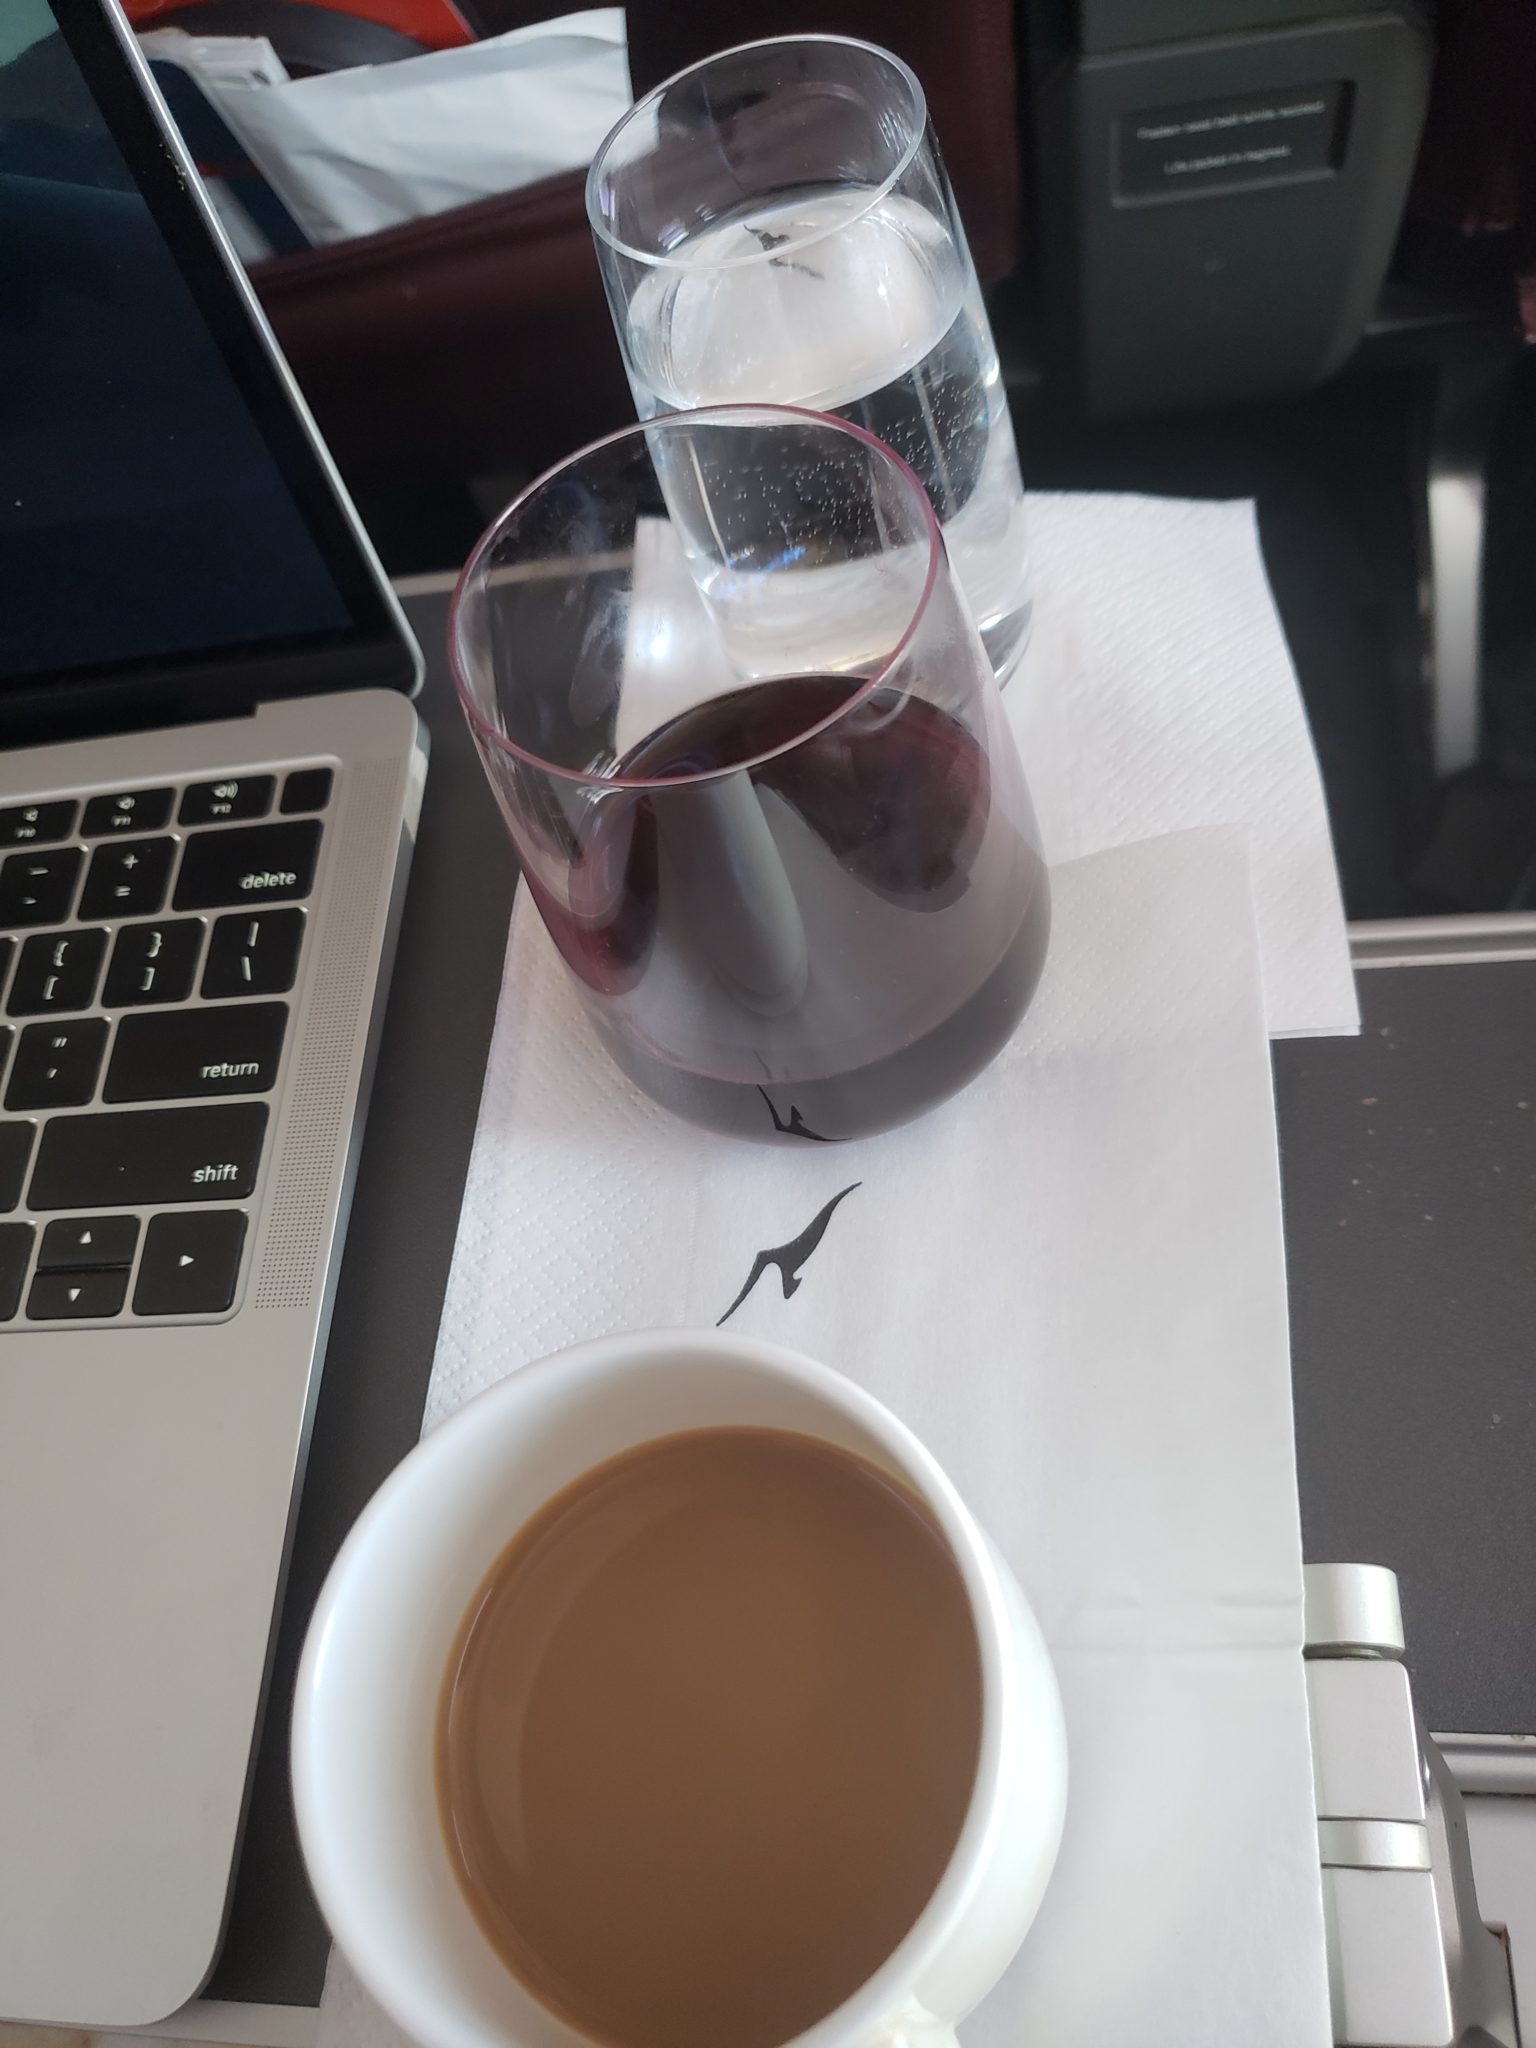 a cup of coffee and a glass of liquid on a napkin